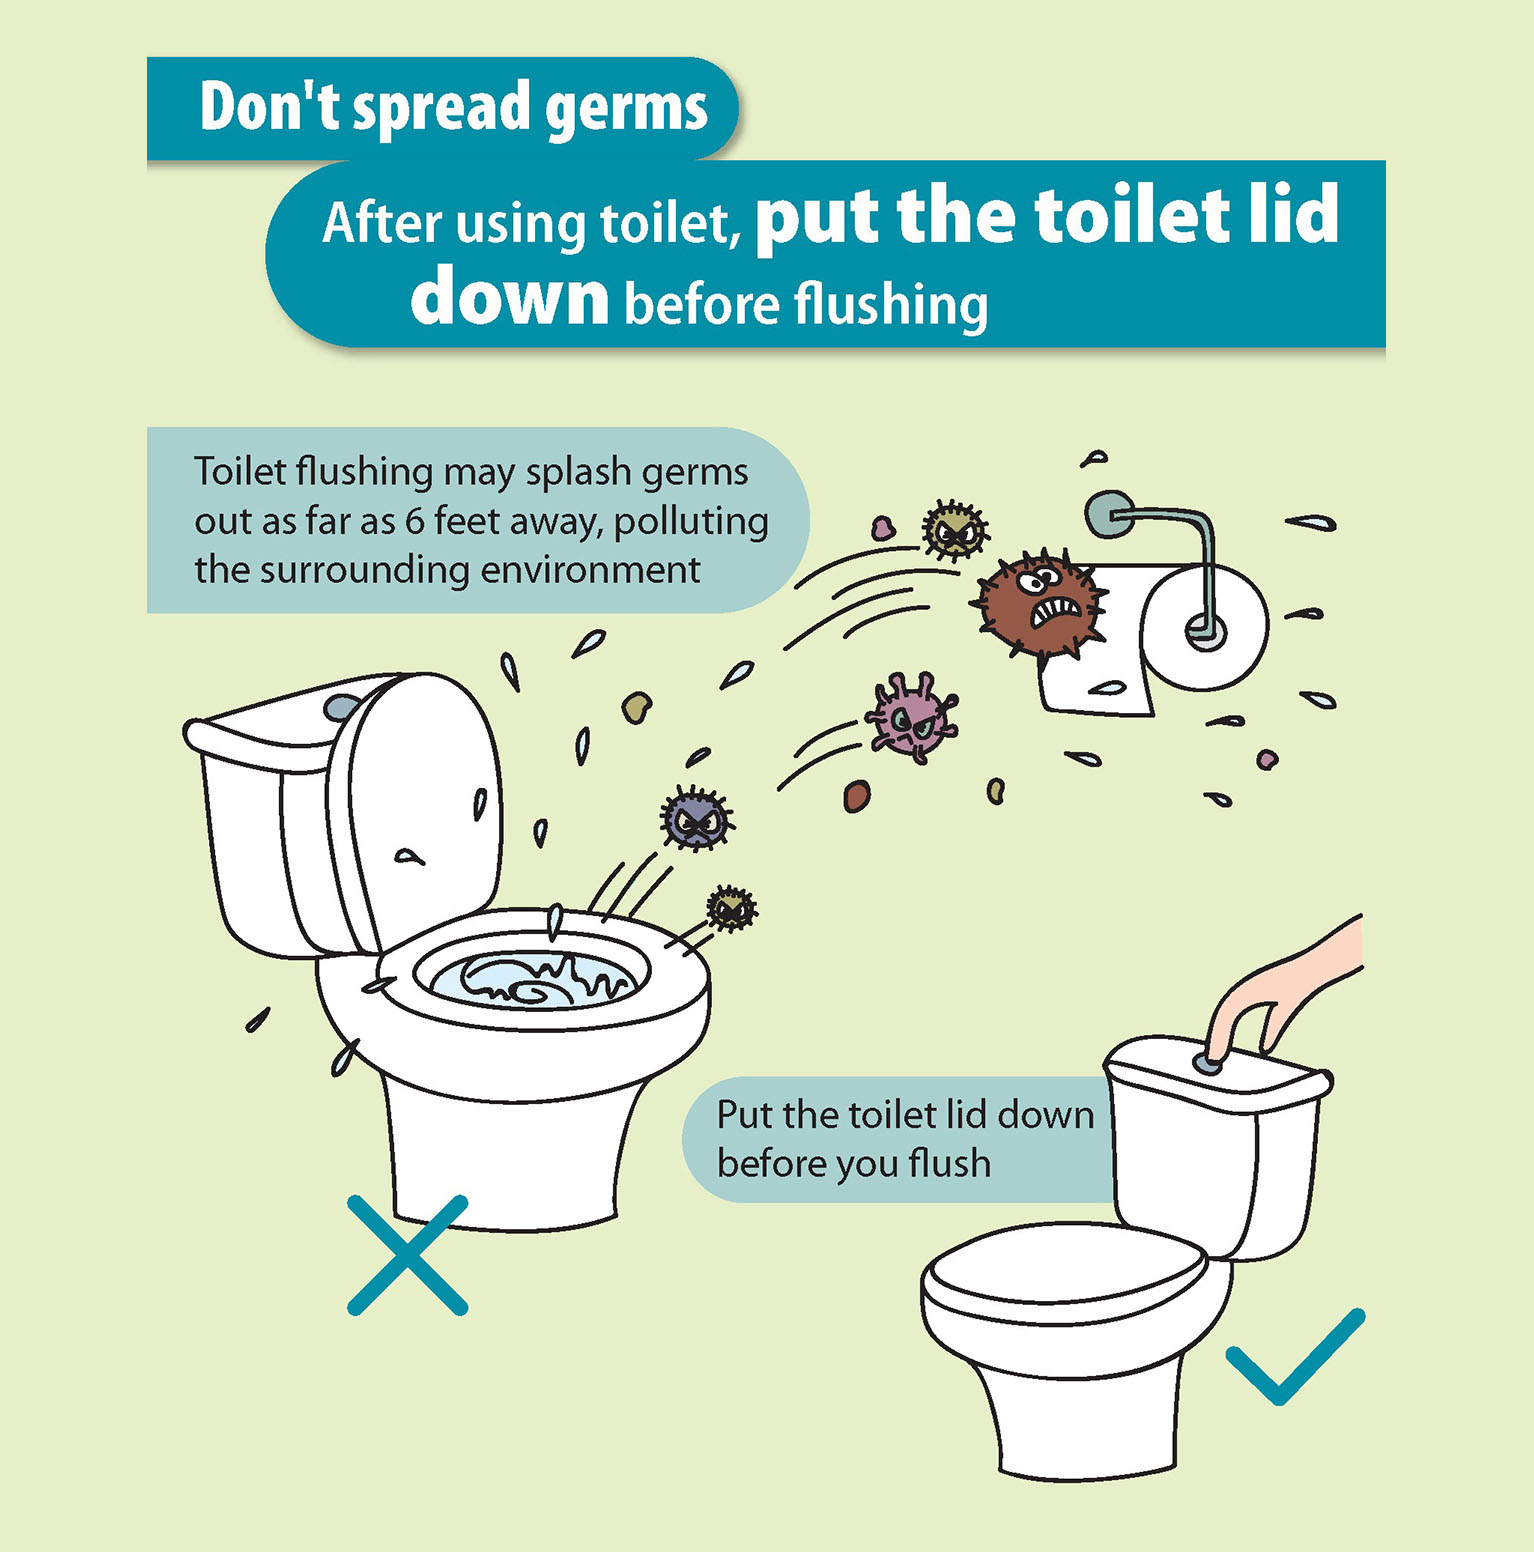 Don't spread germs, After using toilet, put the toilet lid down before flushing